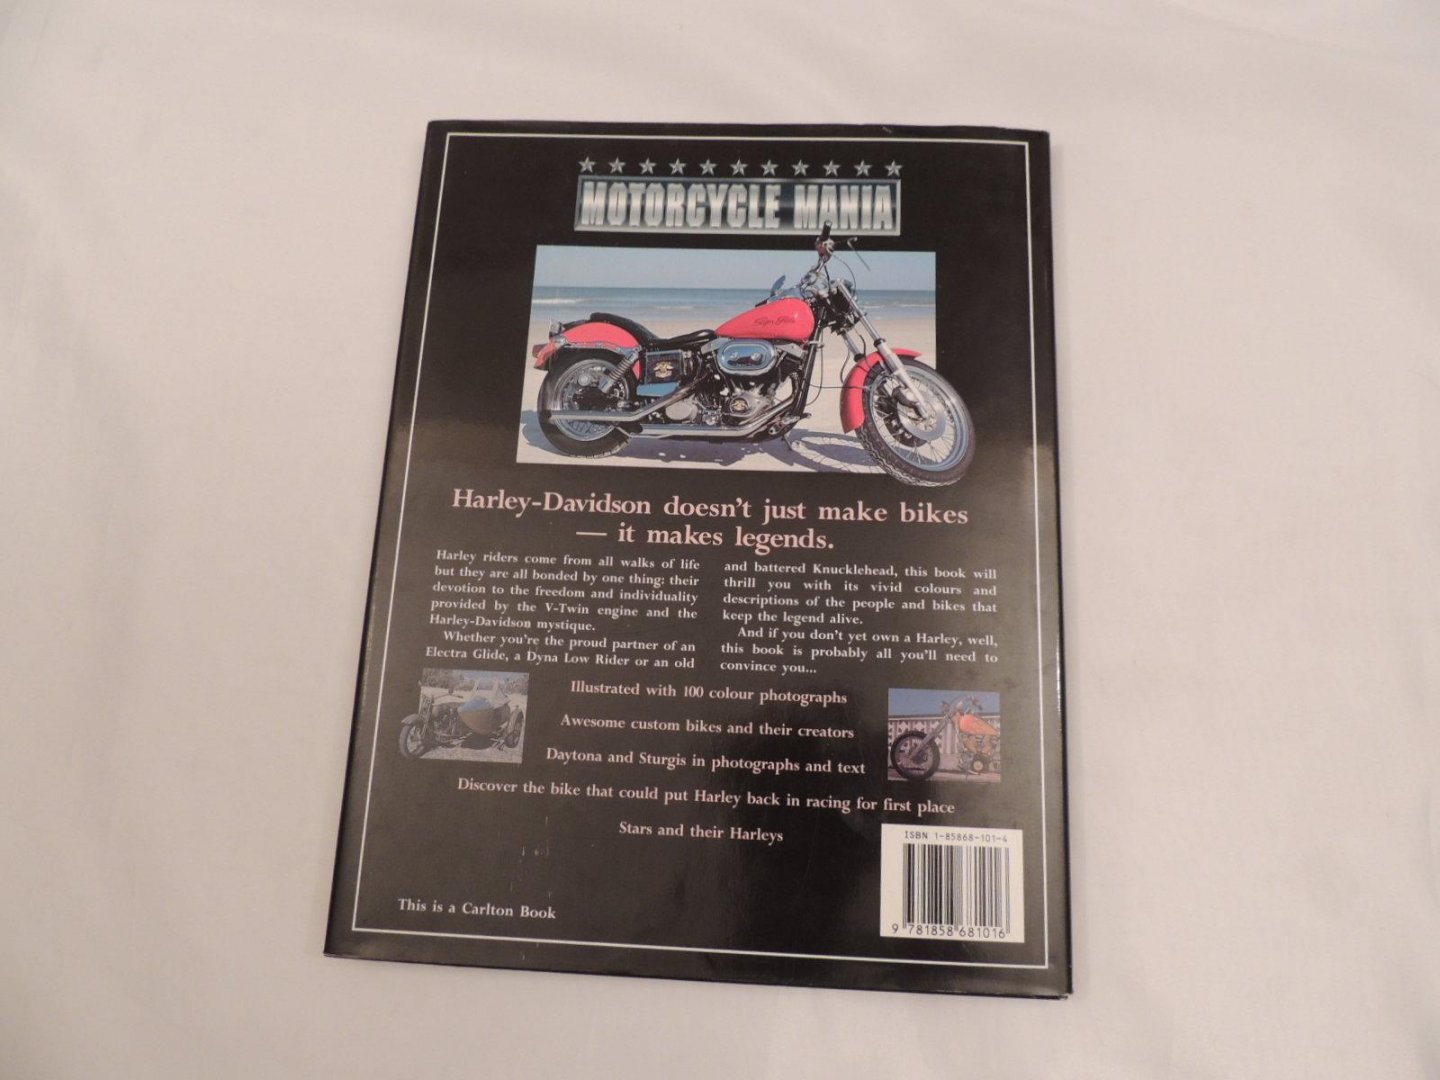 Scott, Graham - Motorcycle Mania. Harley Davidson: The Power, the Glory, the Legend Lives